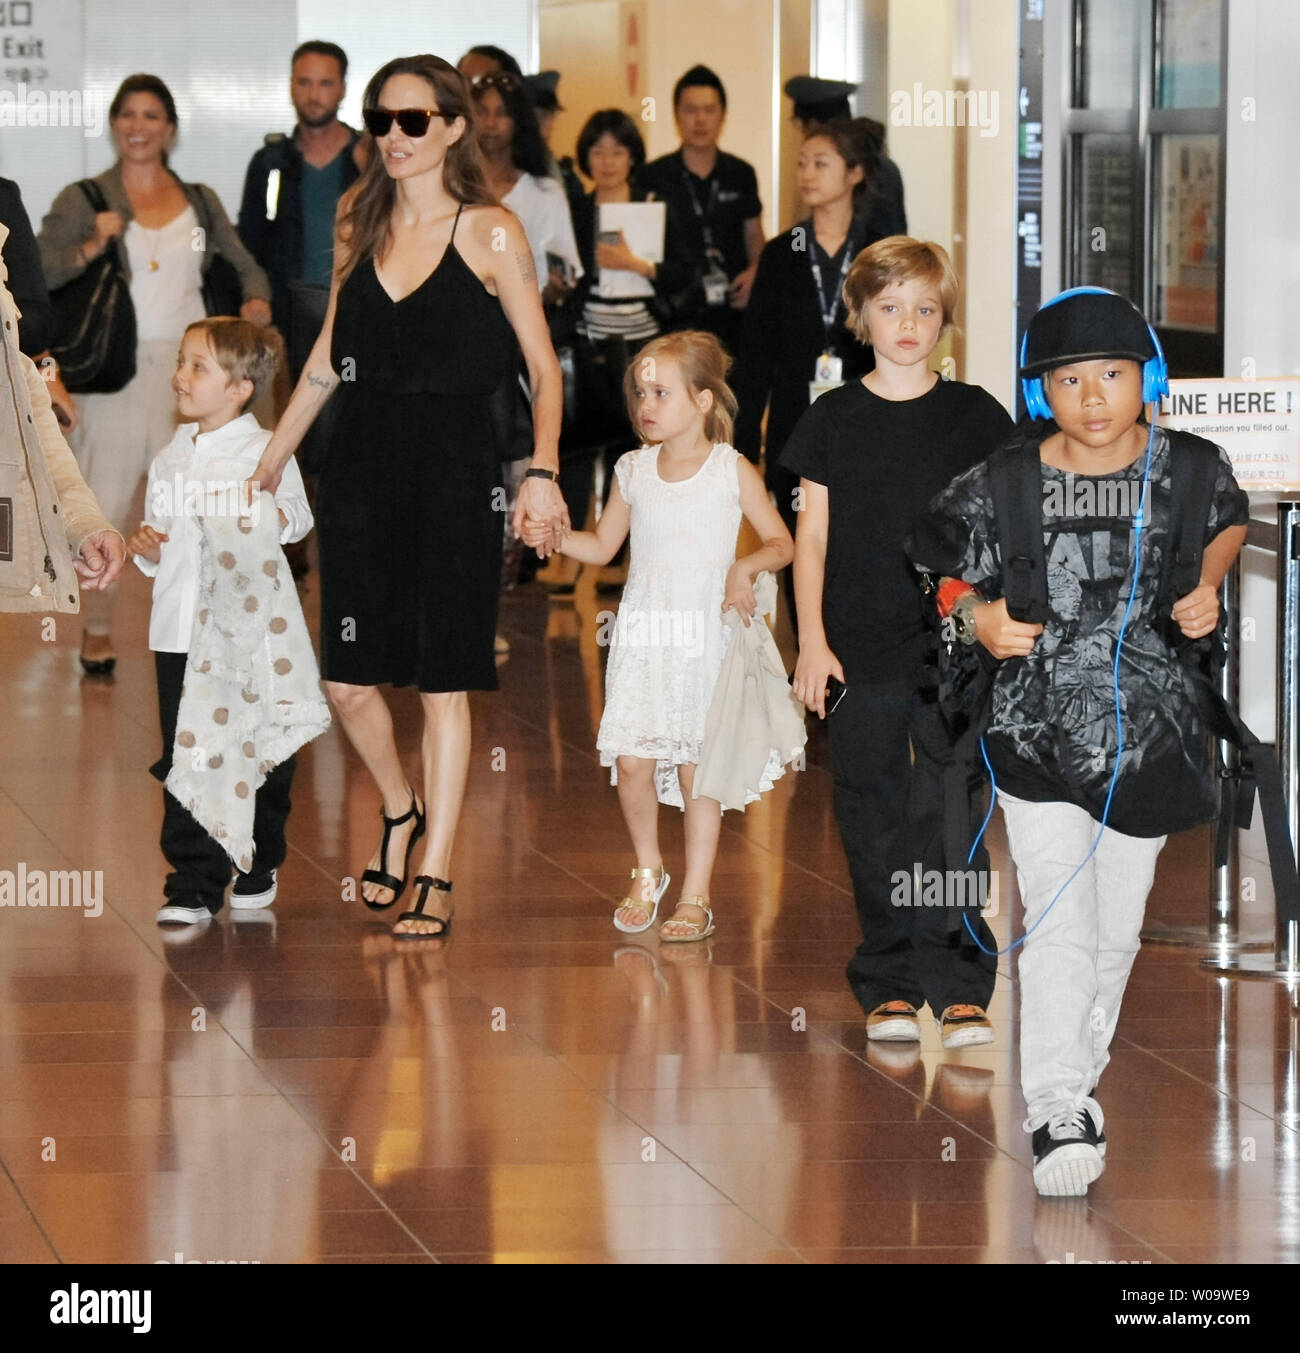 (L-R) Knox Leon Jolie-Pitt, Angelina Jolie, Vivienne Jolie-Pitt, Shiloh Jolie Pitt and Pax Thien Jolie-Pitt  arrive at Tokyo International Airport in Tokyo, Japan on June 21, 2014. Jolie and family are in Tokyo for the Japanese premiere of Maleficent.       UPI/Keizo Mori Stock Photo